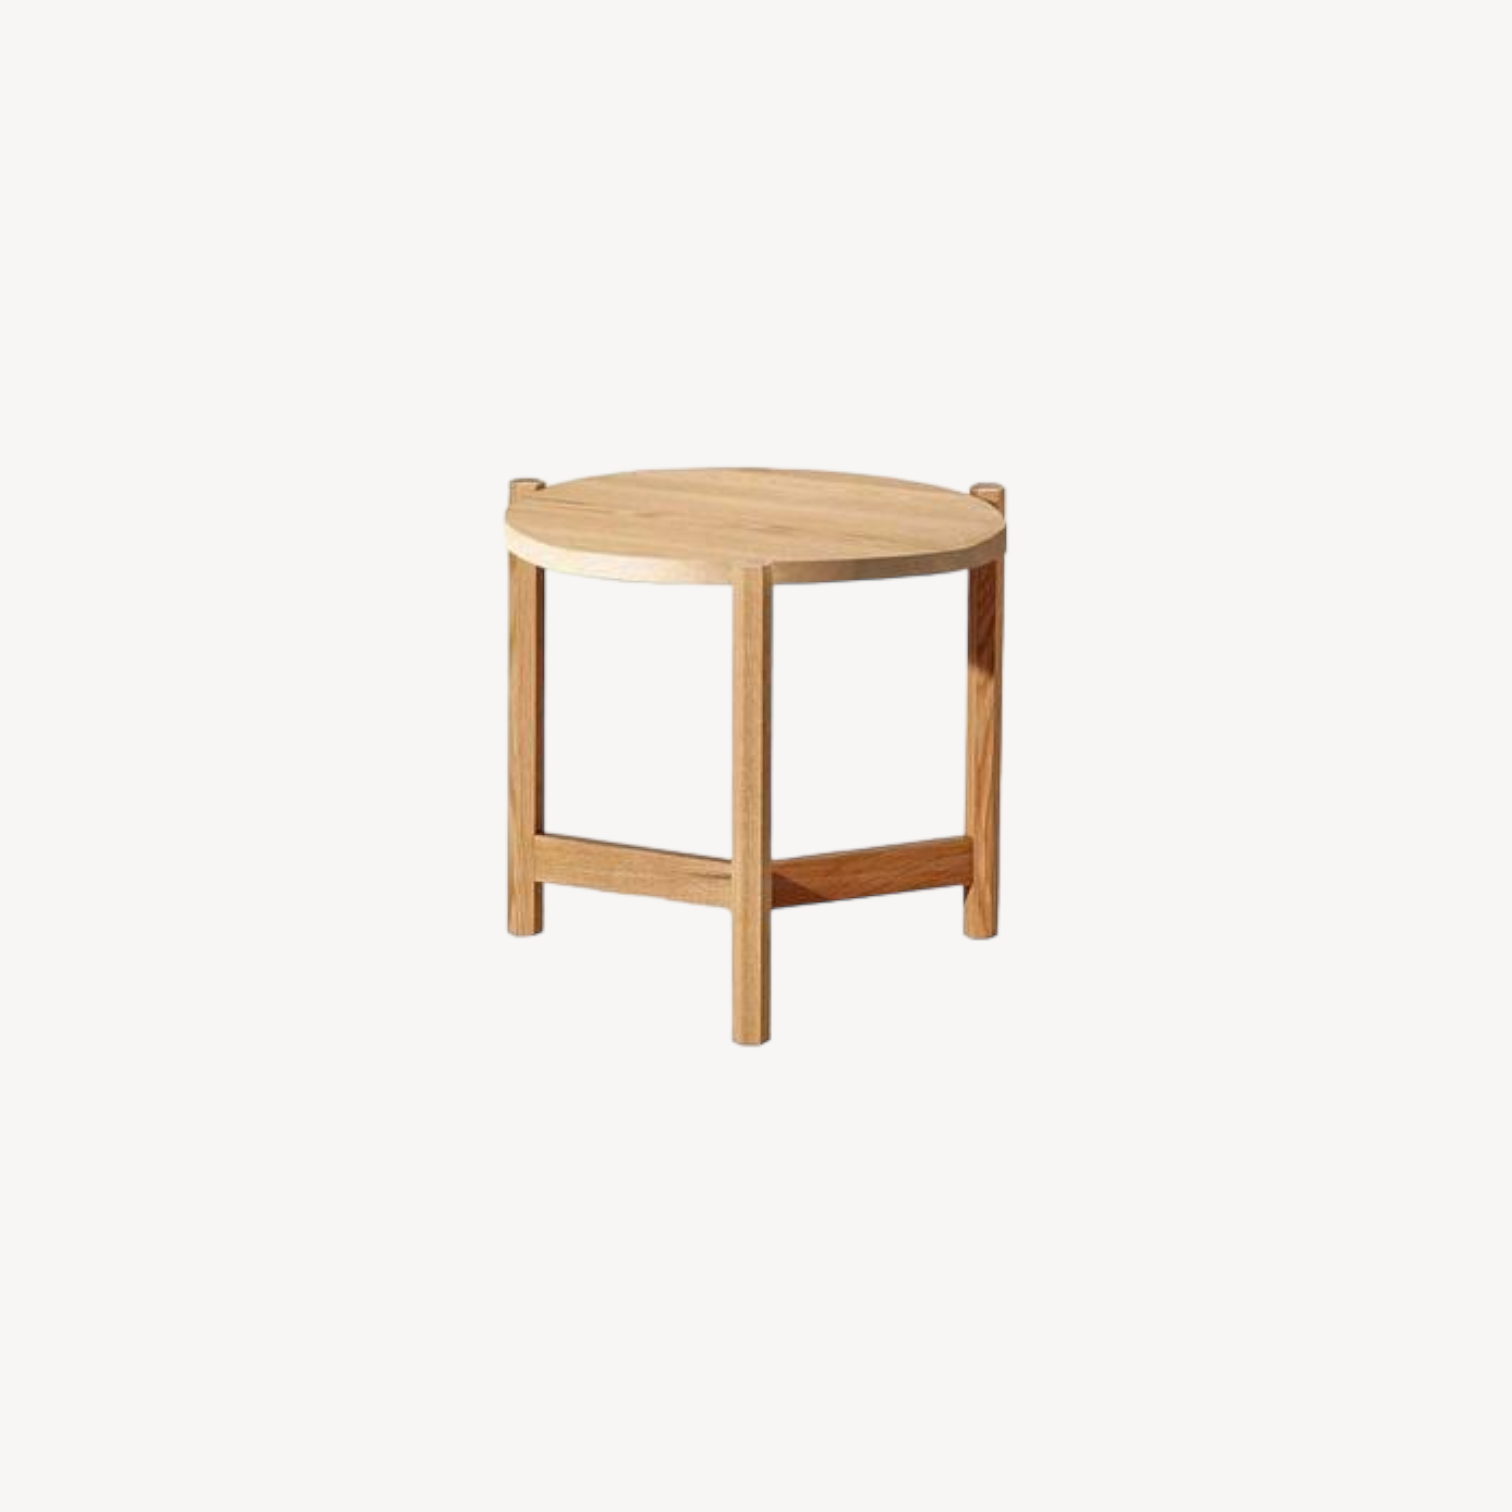 Tribute Timber Lamp Table - Zuster Furniture